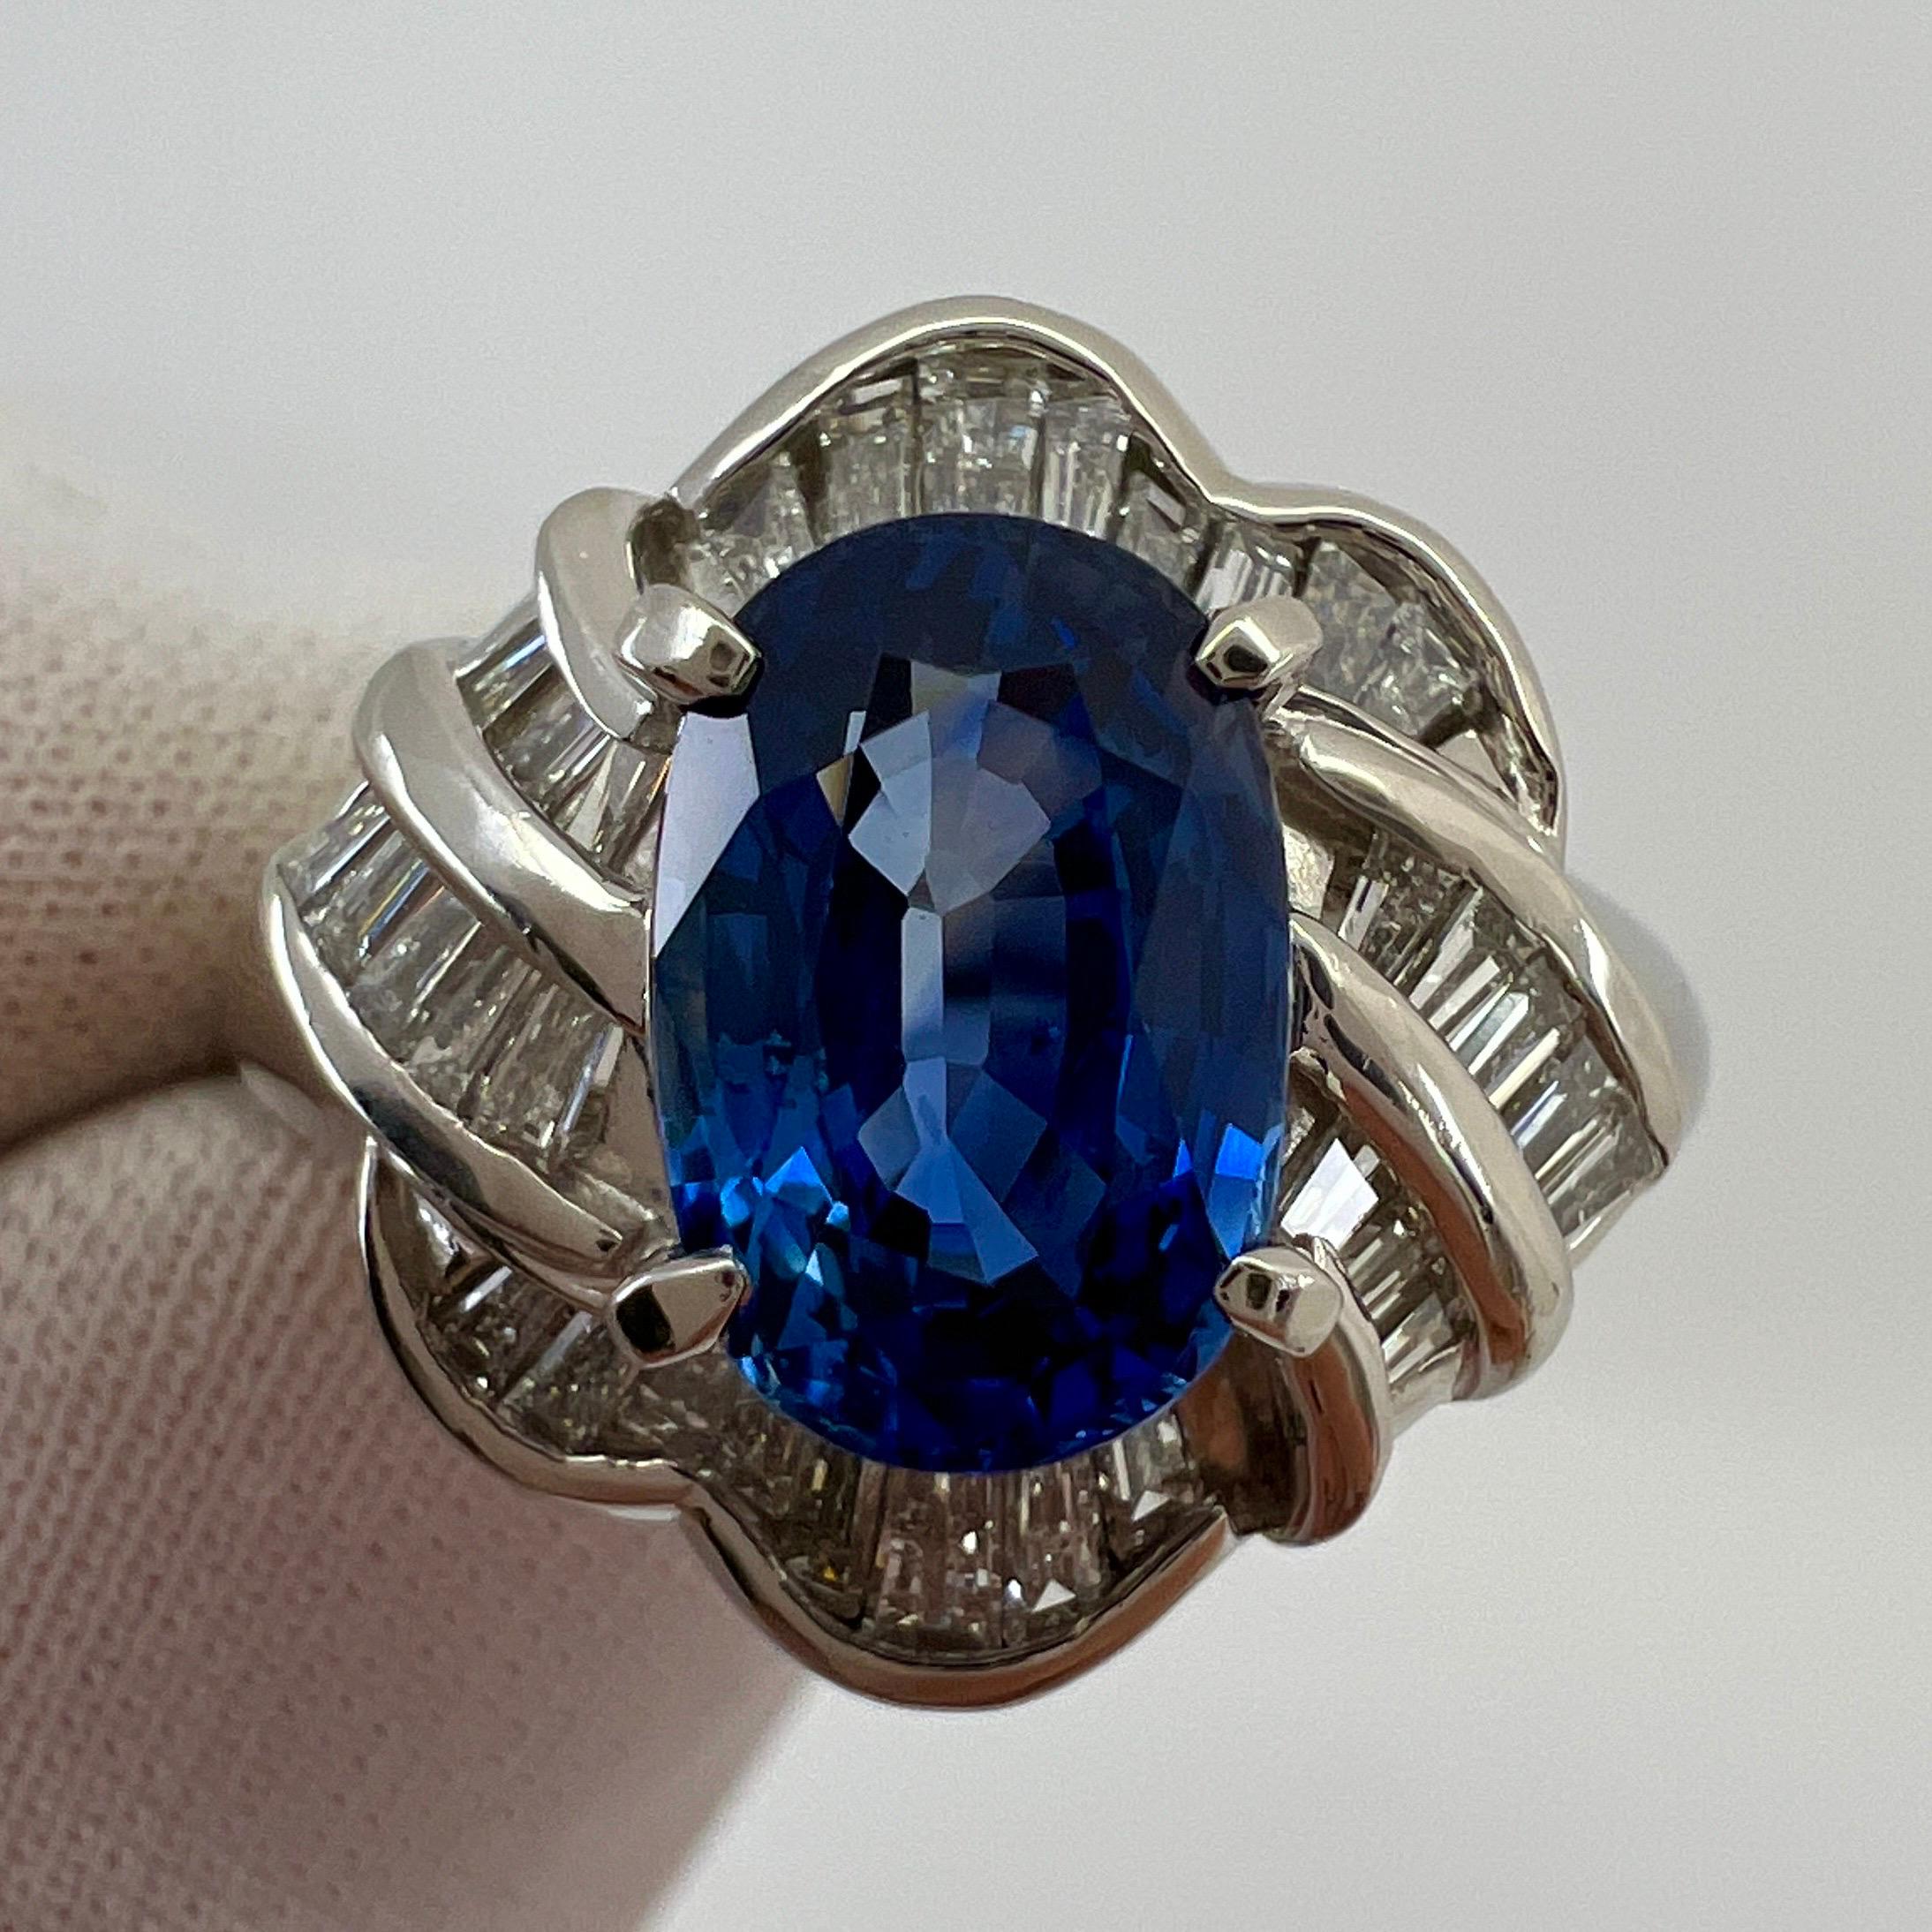 Fine Ceylon Blue Sapphire & Diamond Platinum Cocktail Ring.

3.27 Total carat weight. 2.67 Carat Ceylon sapphire with a stunning vivid blue colour and excellent clarity. Very clean stone. Also has an excellent oval cut.
Accented by 0.60ct of fine